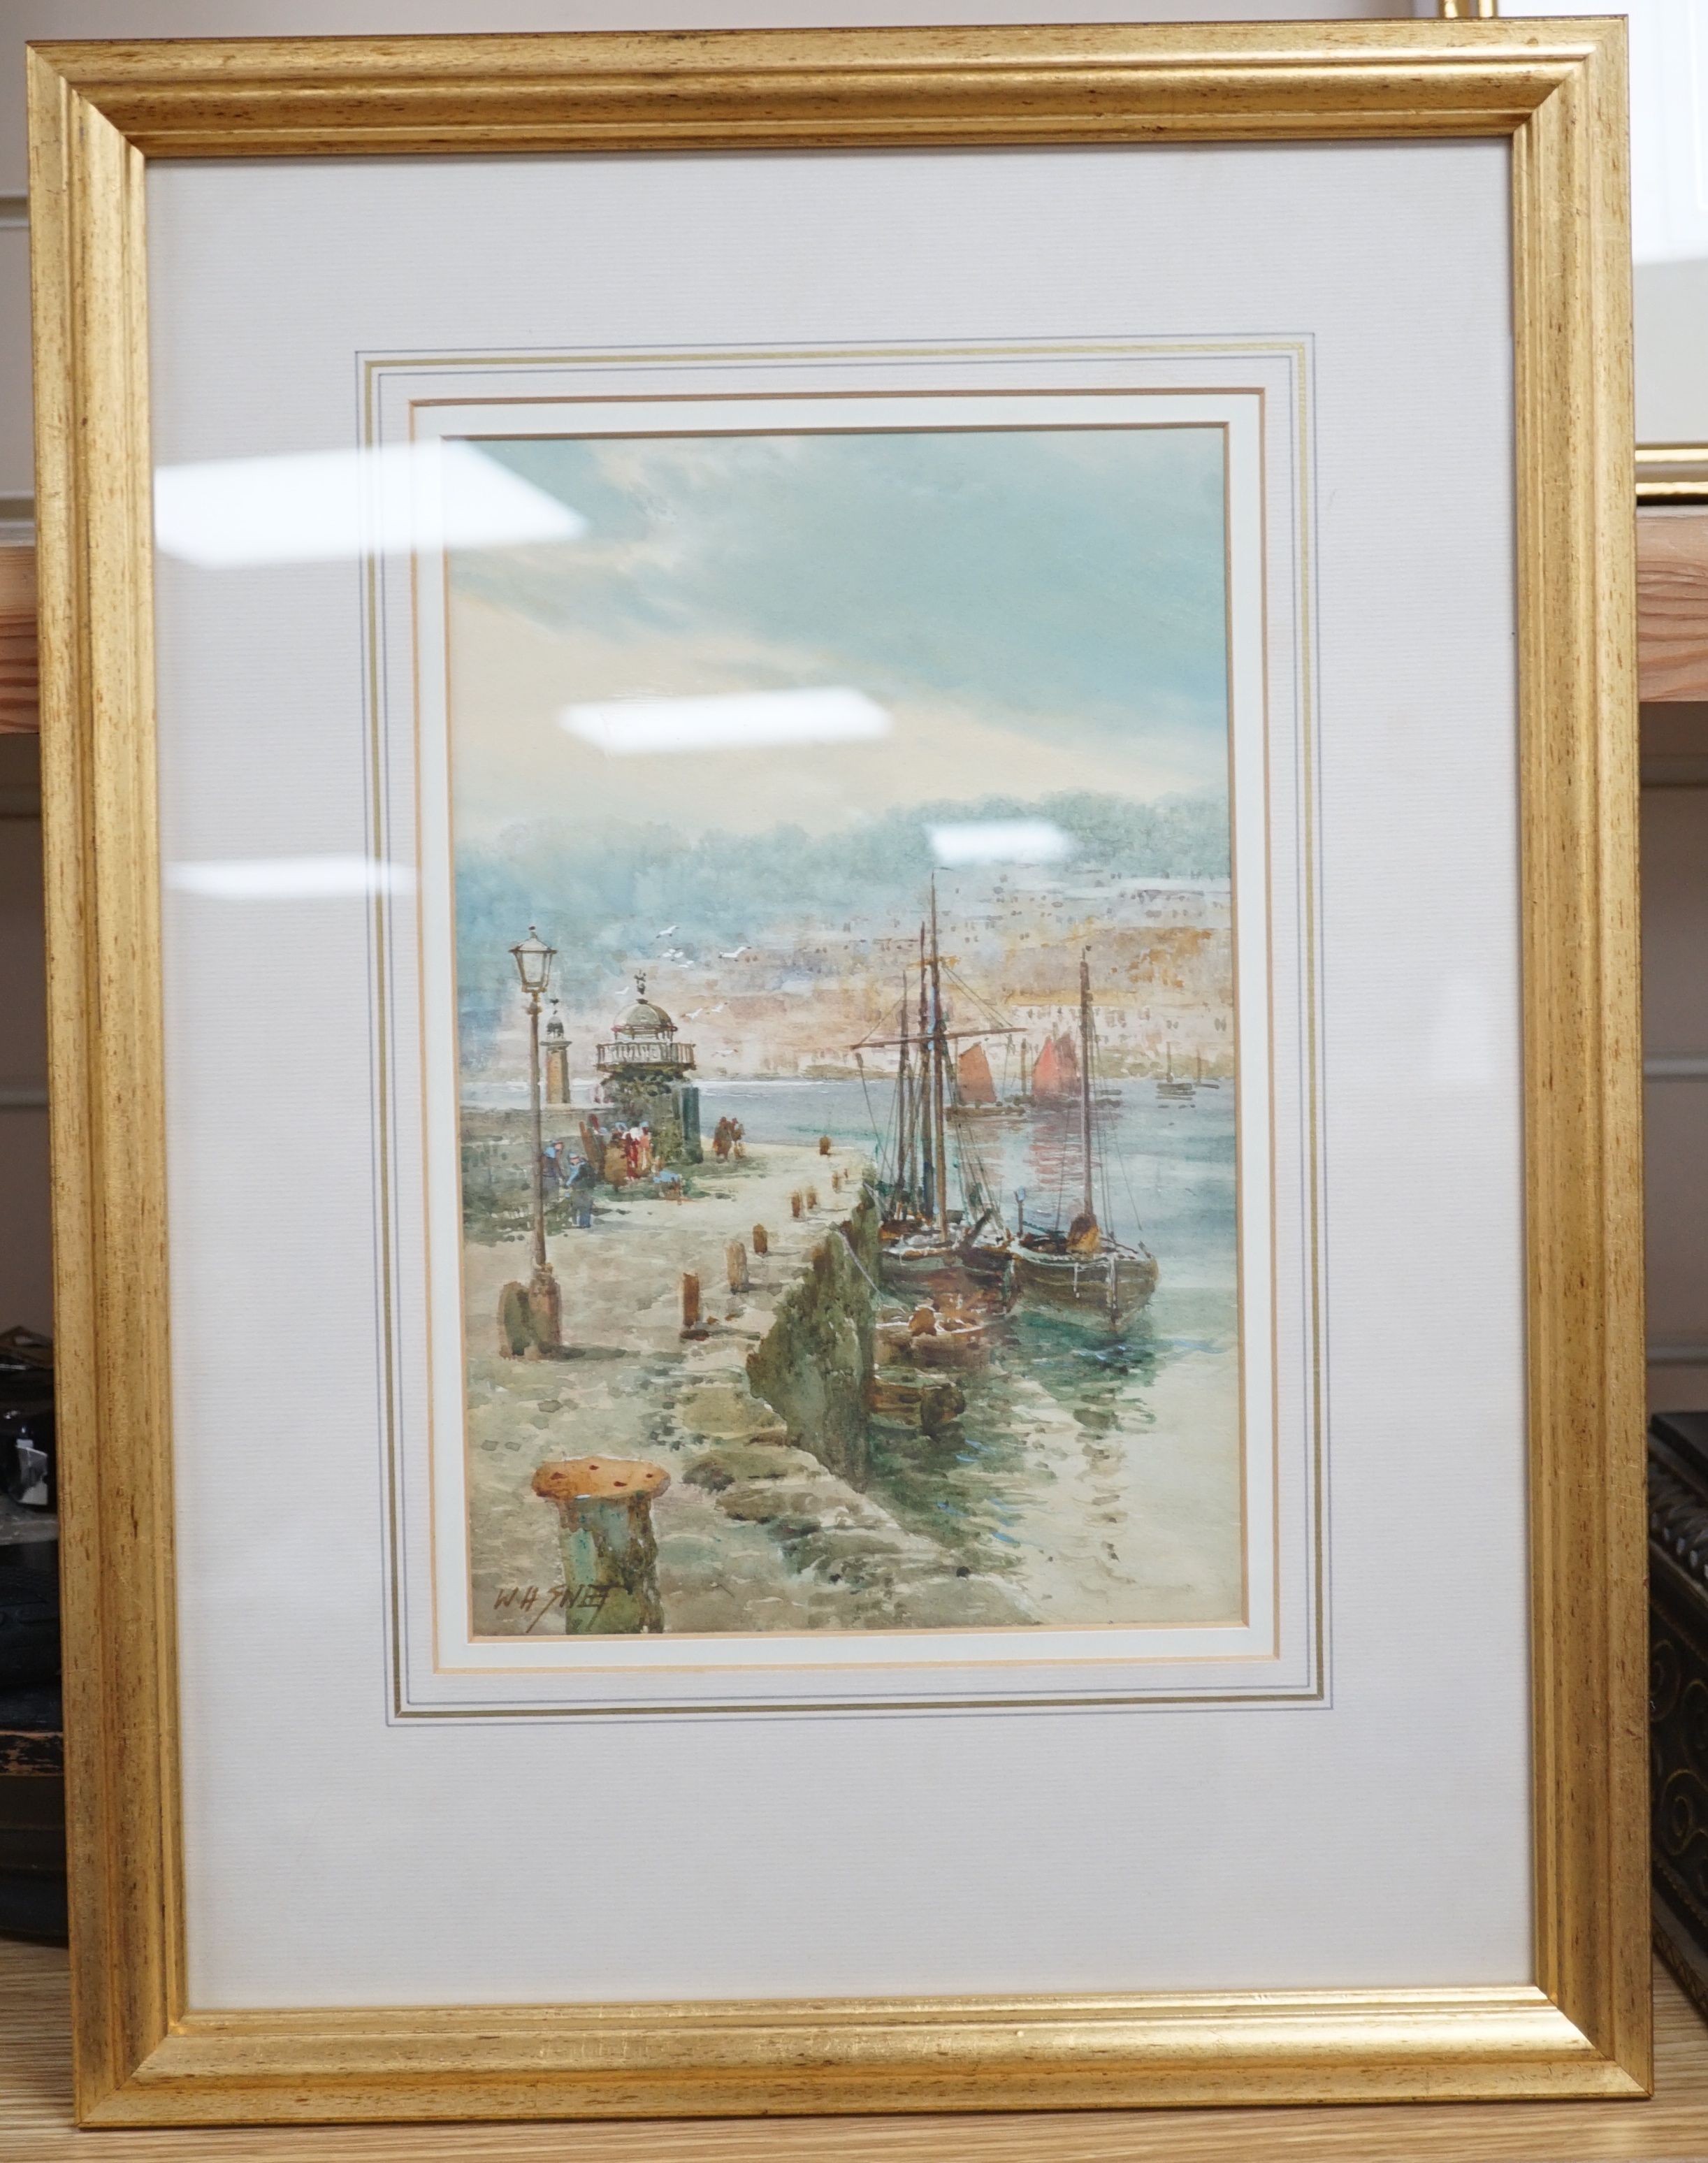 Walter H. Sweet (1890-1943), Fishing boats at Newlyn, watercolour, signed, 27 x 18cm - Image 3 of 3